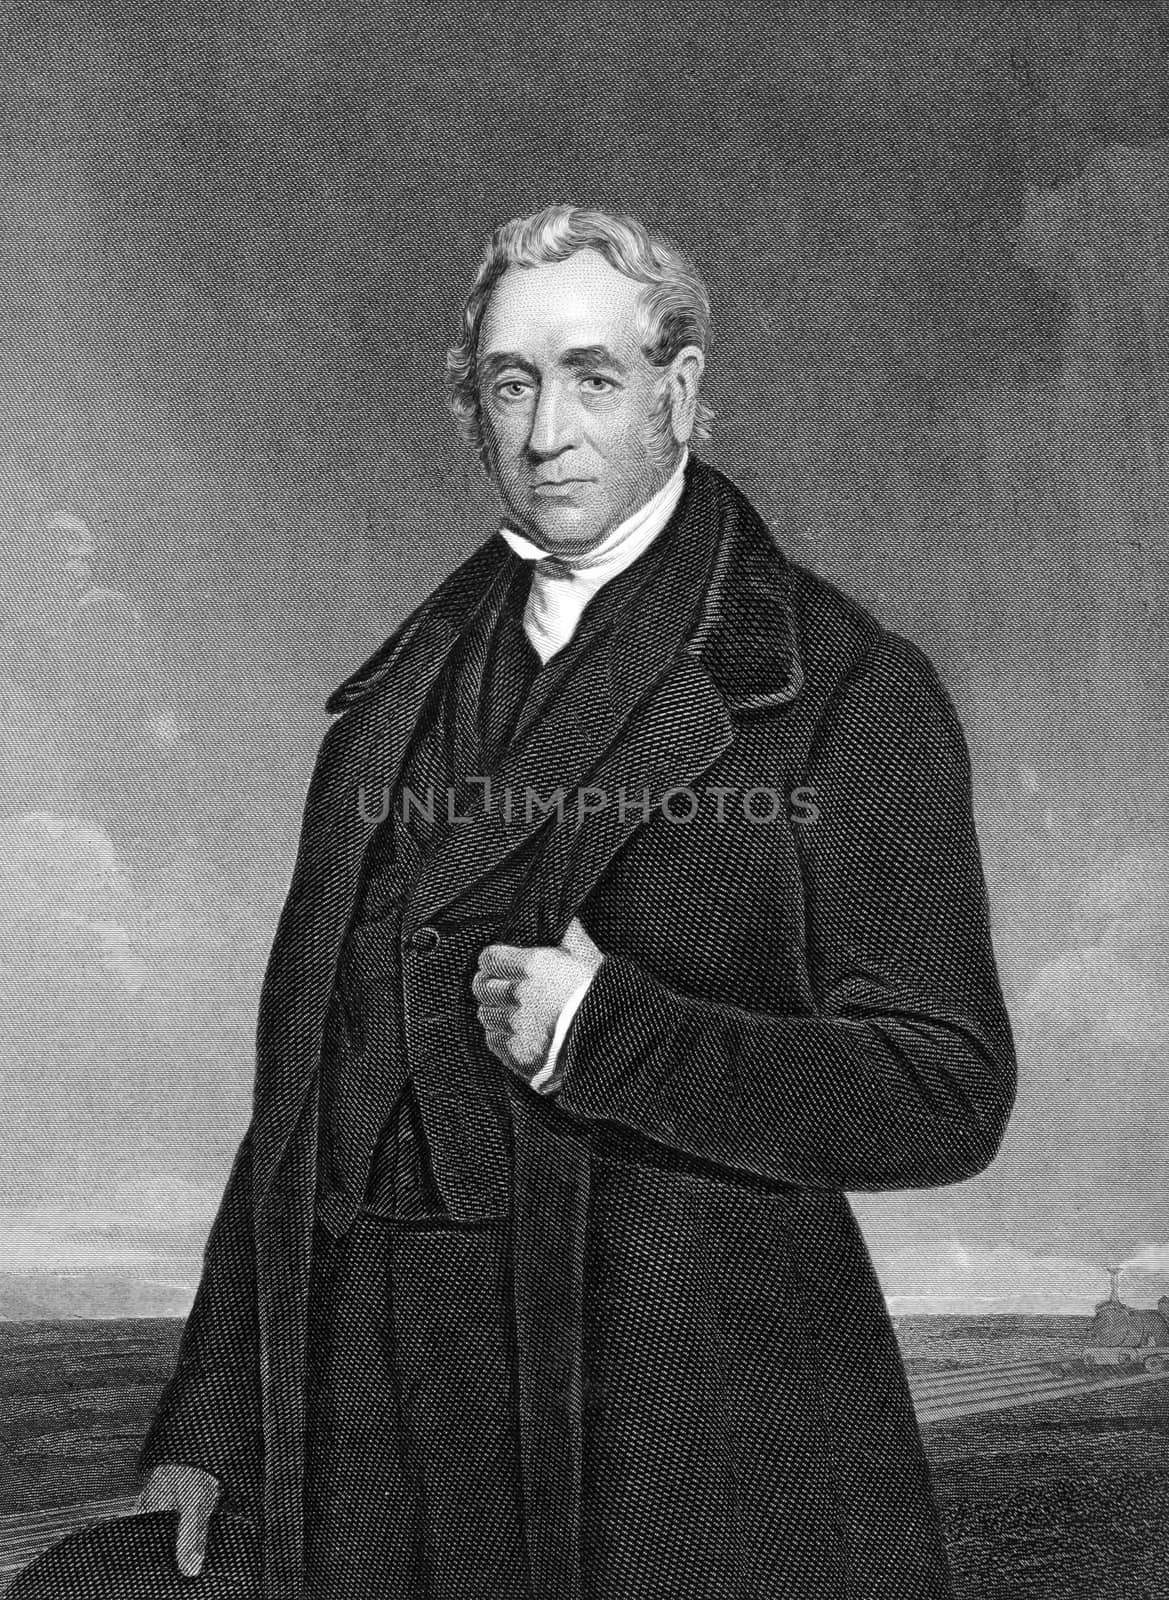 George Stephenson (1781-1848) on engraving from 1873. English civil engineer and mechanical engineer who built the first public inter-city railway line in the world to use steam locomotives. Engraved by unknown artist and published in ''Portrait Gallery of Eminent Men and Women with Biographies'',USA,1873.